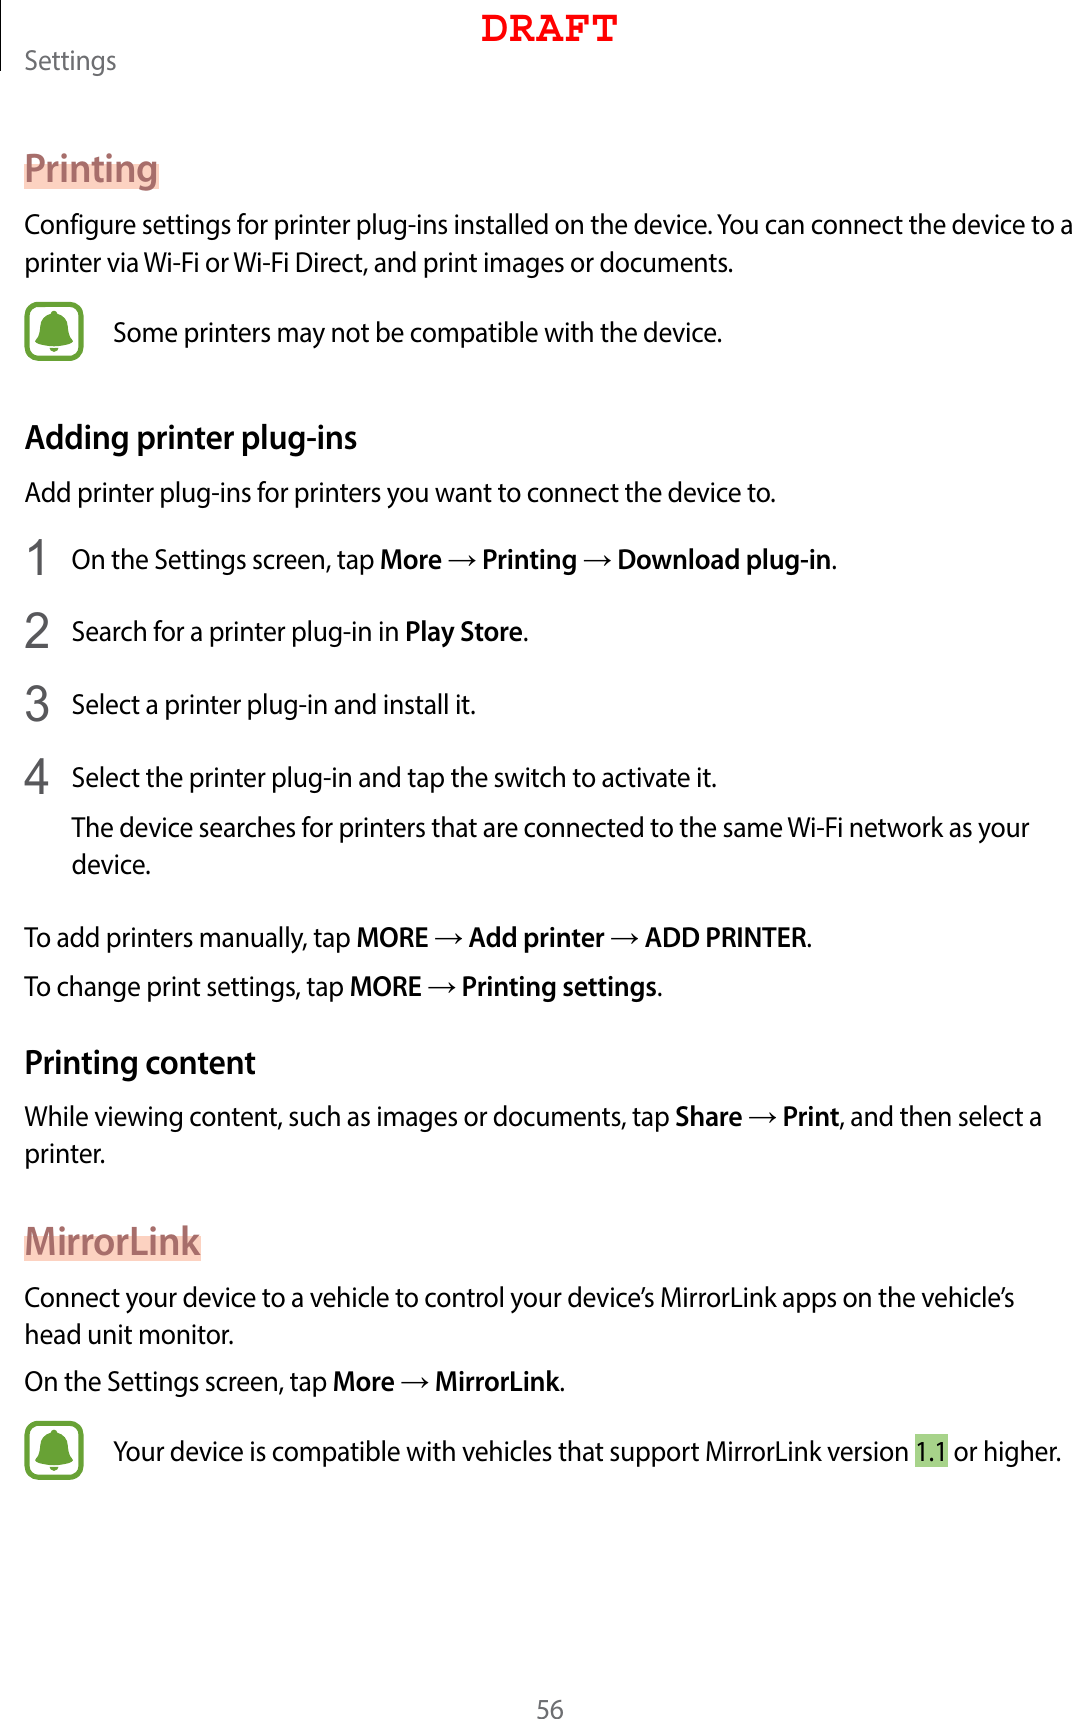 Settings56PrintingConfigure settings for printer plug-ins installed on the device. You can connect the device to a printer via Wi-Fi or Wi-Fi Direct, and print images or documents.Some printers may not be compatible with the device.Adding printer plug-insAdd printer plug-ins for printers you want to connect the device to.1  On the Settings screen, tap More → Printing → Download plug-in.2  Search for a printer plug-in in Play Store.3  Select a printer plug-in and install it.4  Select the printer plug-in and tap the switch to activate it.The device searches for printers that are connected to the same Wi-Fi network as your device.To add printers manually, tap MORE → Add printer → ADD PRINTER.To change print settings, tap MORE → Printing settings.Printing contentWhile viewing content, such as images or documents, tap Share → Print, and then select a printer.MirrorLinkConnect your device to a vehicle to control your device’s MirrorLink apps on the vehicle’s head unit monitor.On the Settings screen, tap More → MirrorLink.Your device is compatible with vehicles that support MirrorLink version 1.1 or higher.DRAFT